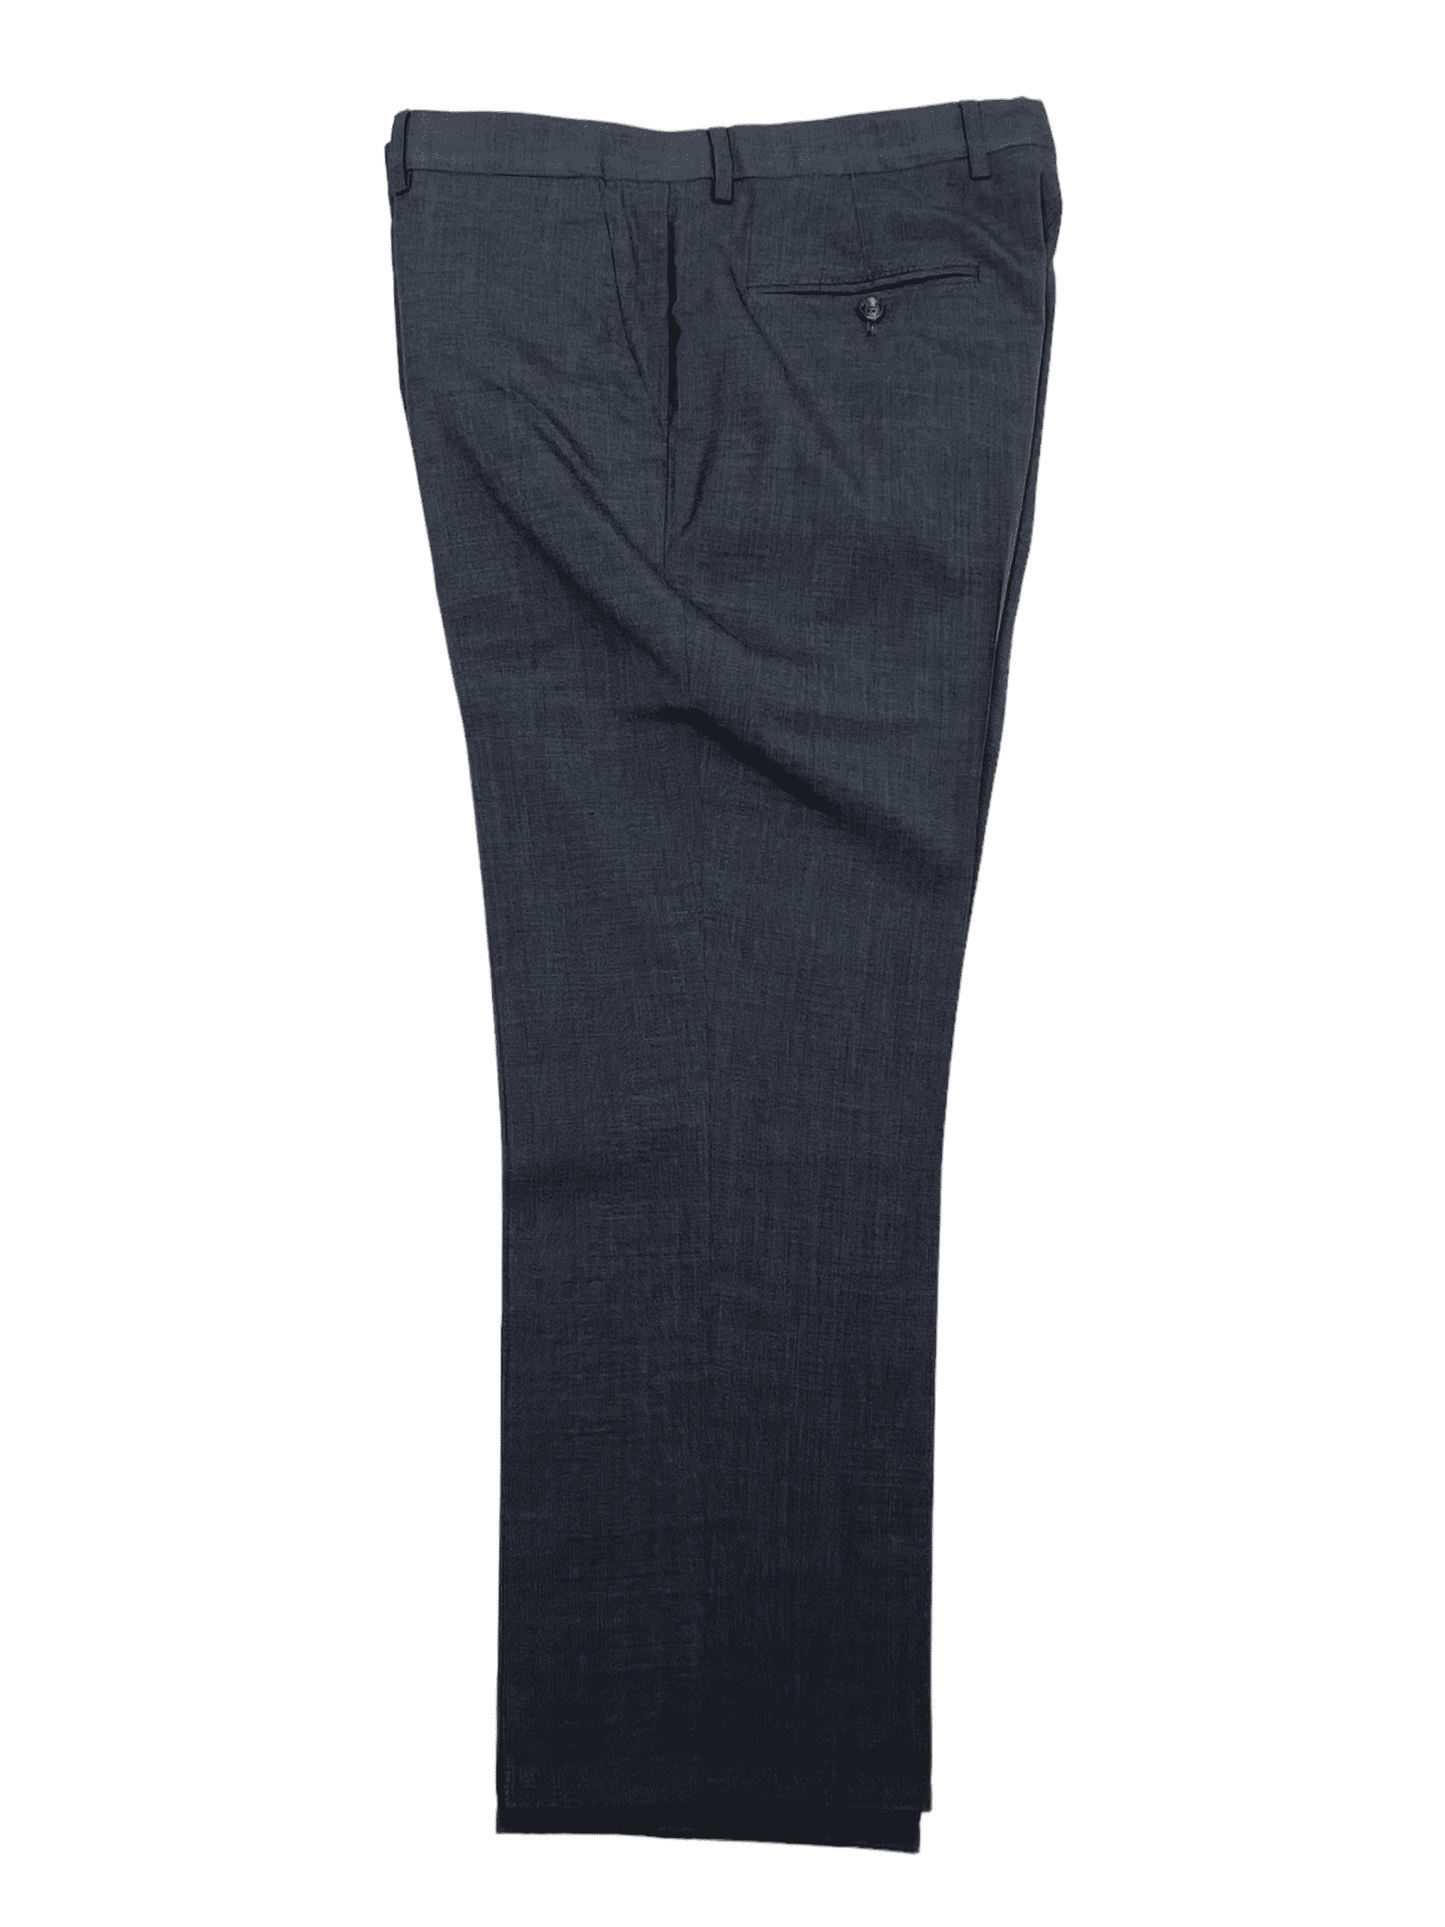 Brunello Cucinelli Charcoal Grey Wool Dress Pant 37W 26L - Genuine Design Luxury Consignment Calgary, Alberta, Canada New and Pre-Owned Clothing, Shoes, Accessories.